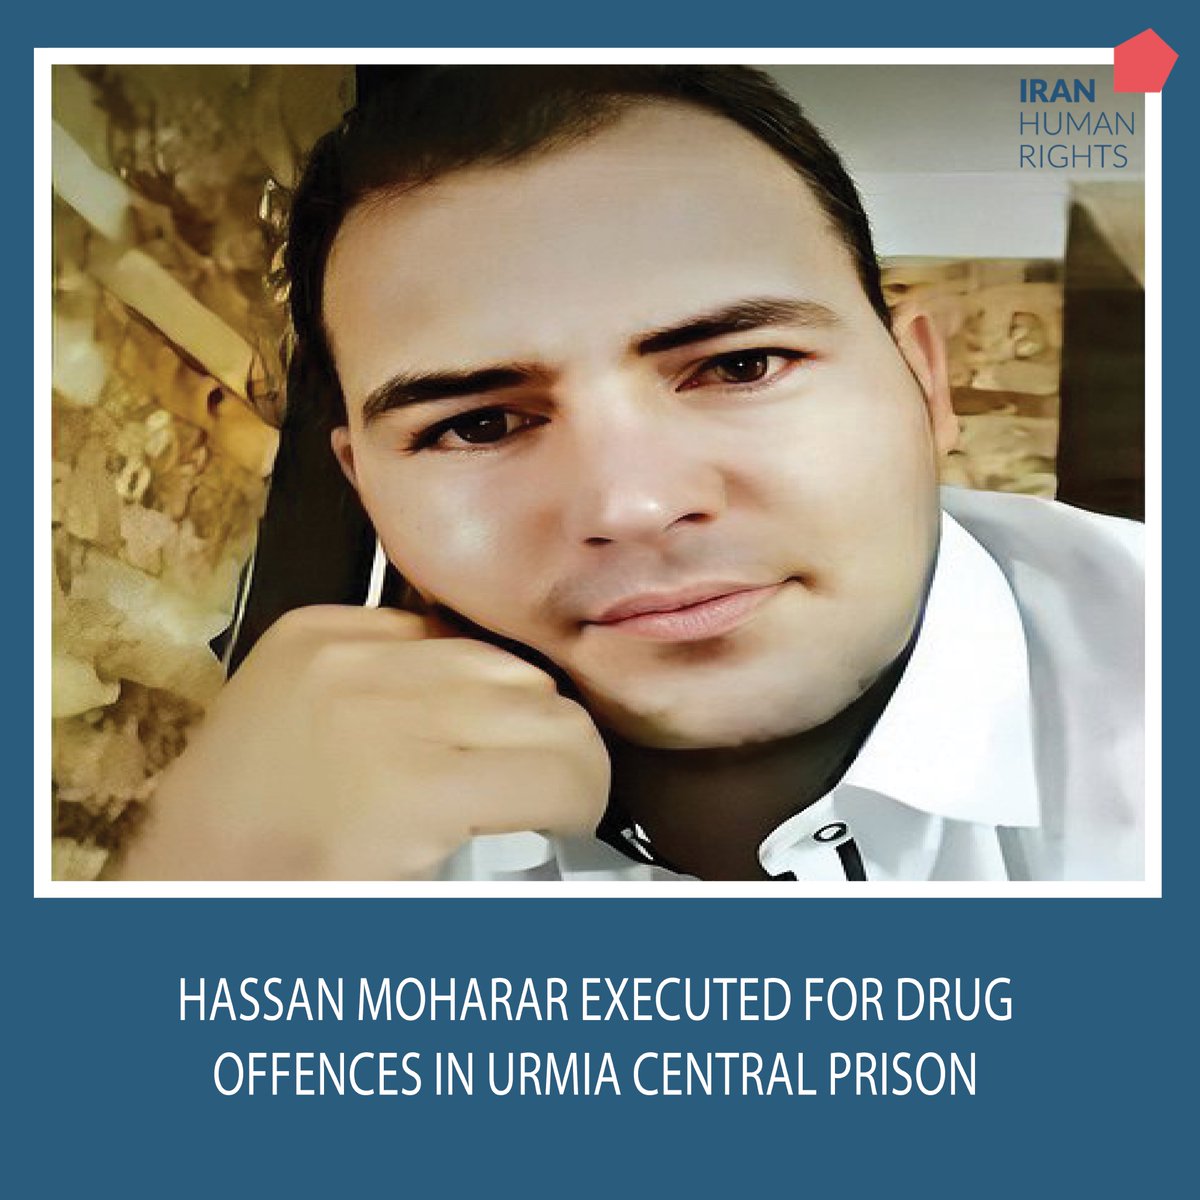 #Iran: Hassan Moharar, a 30-year-old man who spent around 5 years on death row for drug-related offences, was executed in Urmia Central Prison on 7th May. 30 days ago, 80+ organisations and groups called for joint action to stop drug-related executions, urging UNODC to make any…